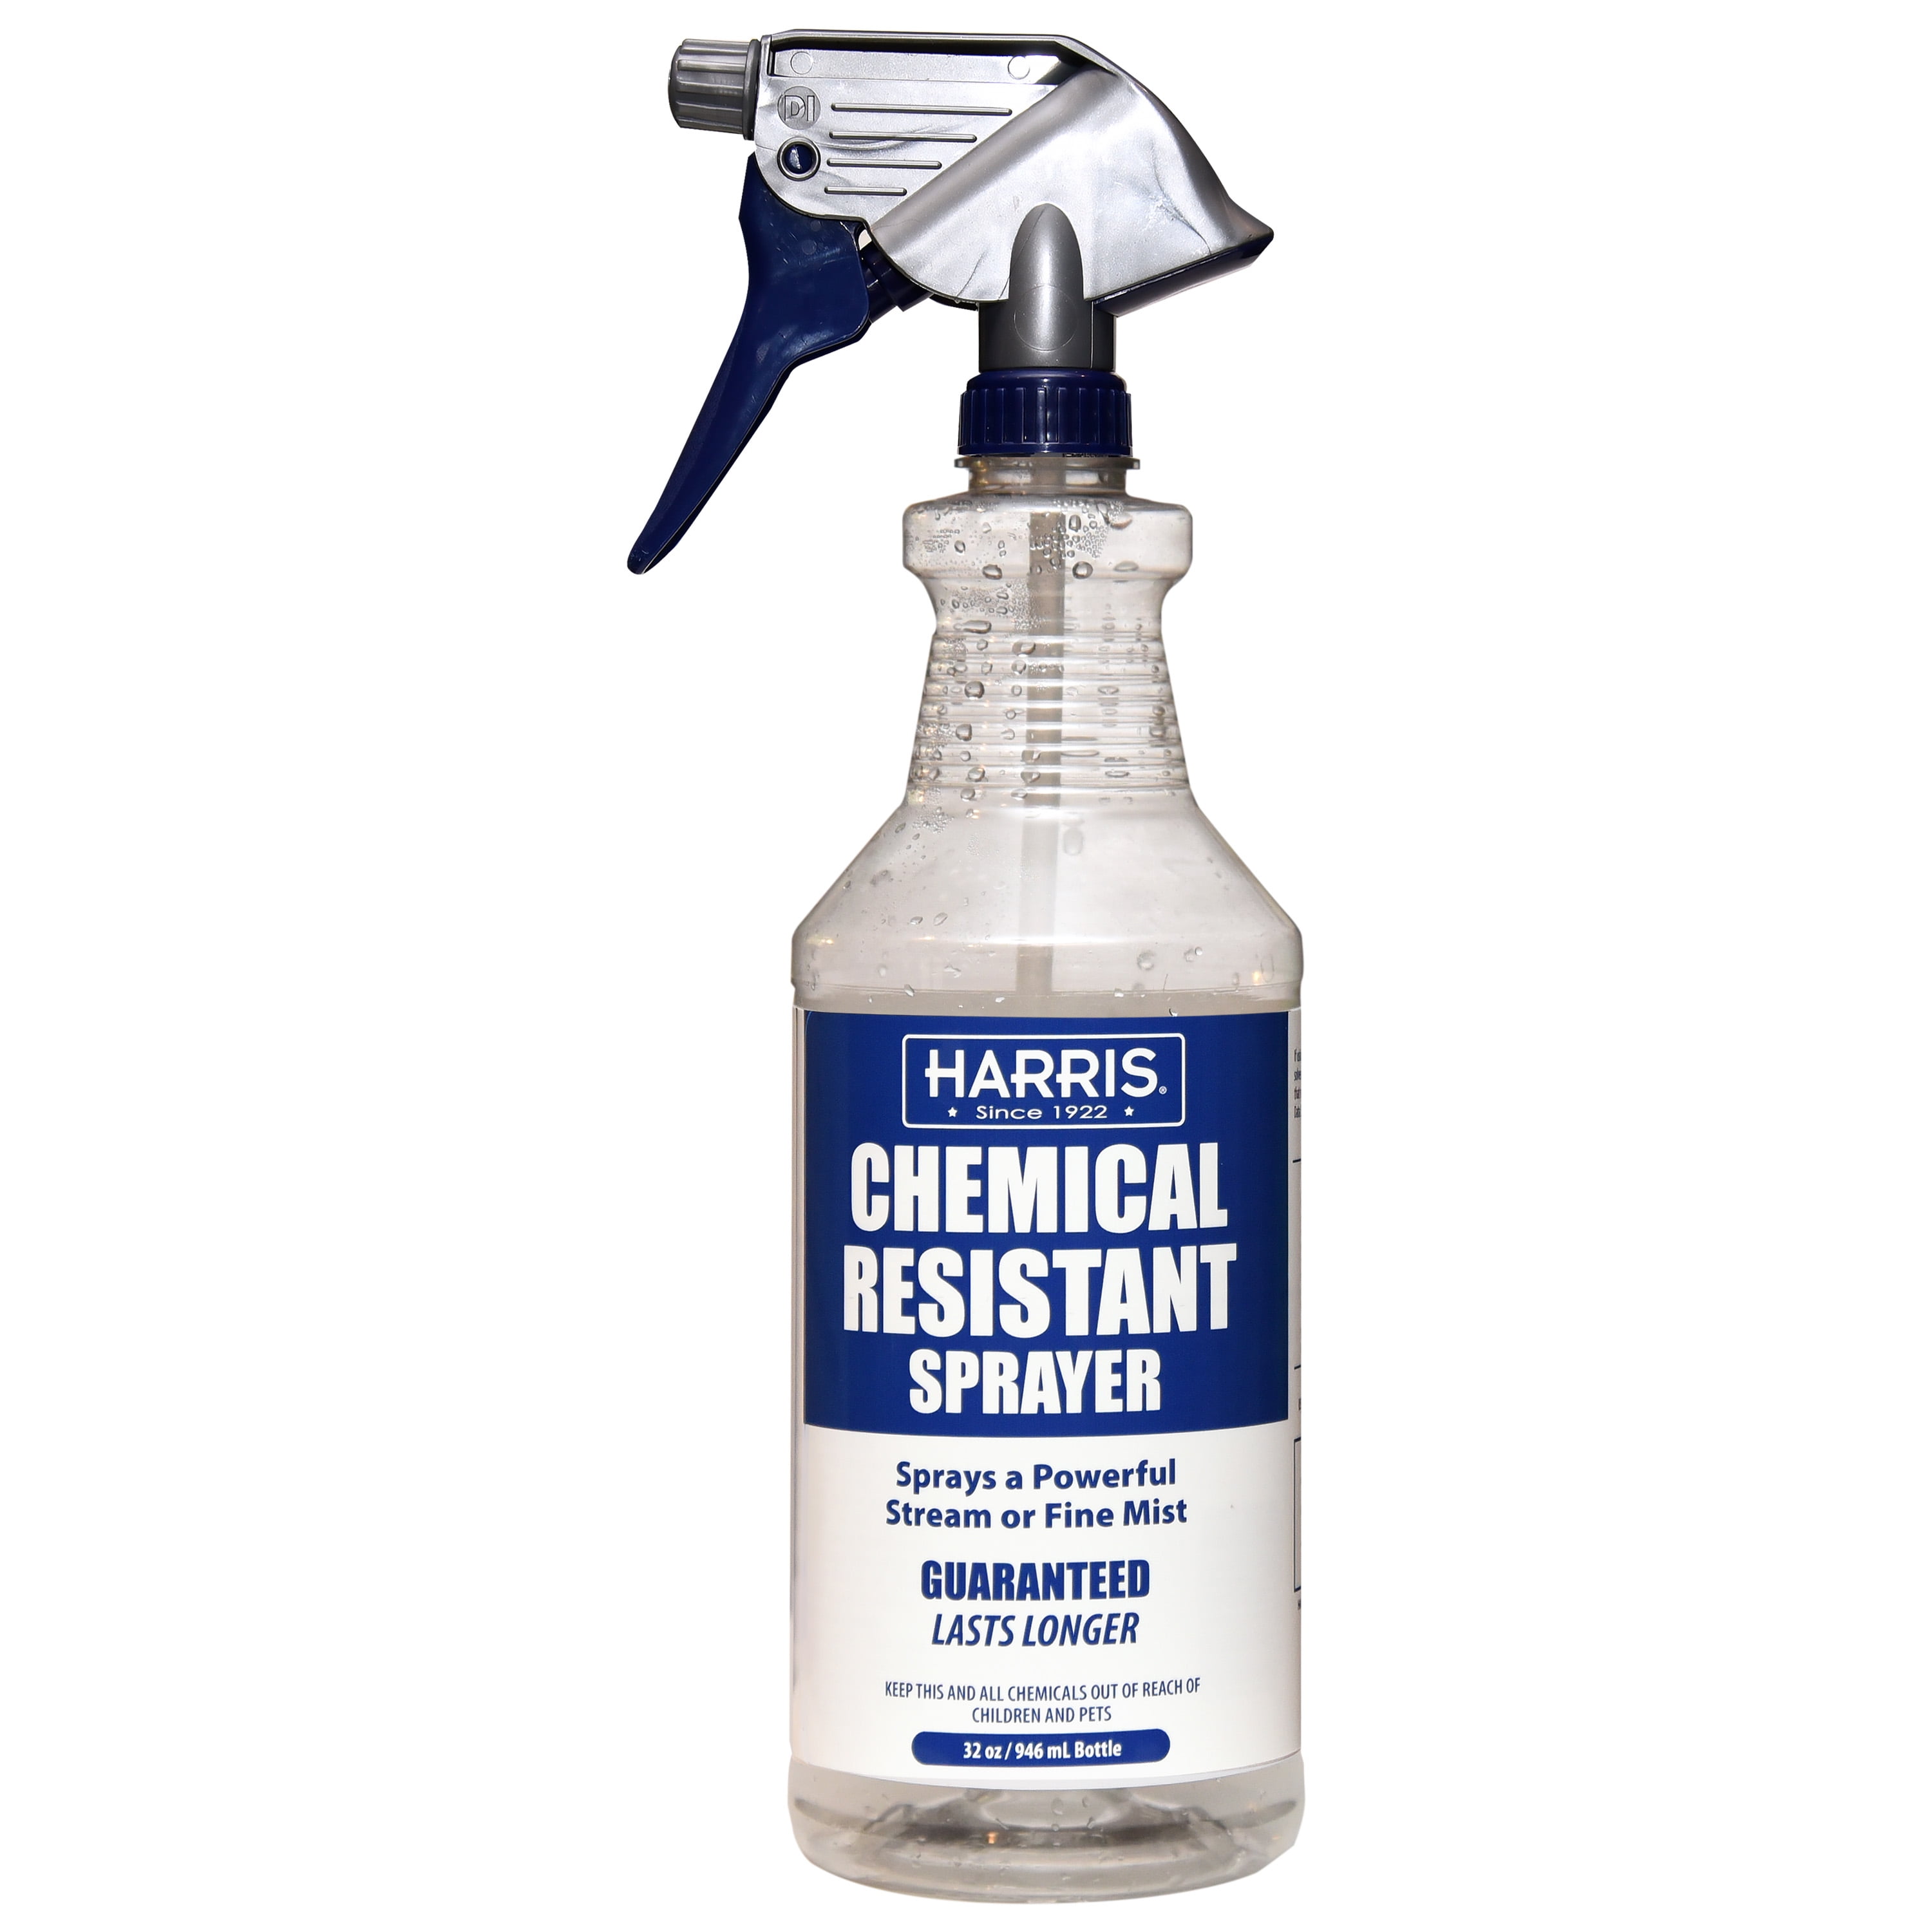 Harris 32 oz. Heavy-Duty Chemical Resistant Pro Spray Bottle (10-Pack)  10CR32 - The Home Depot